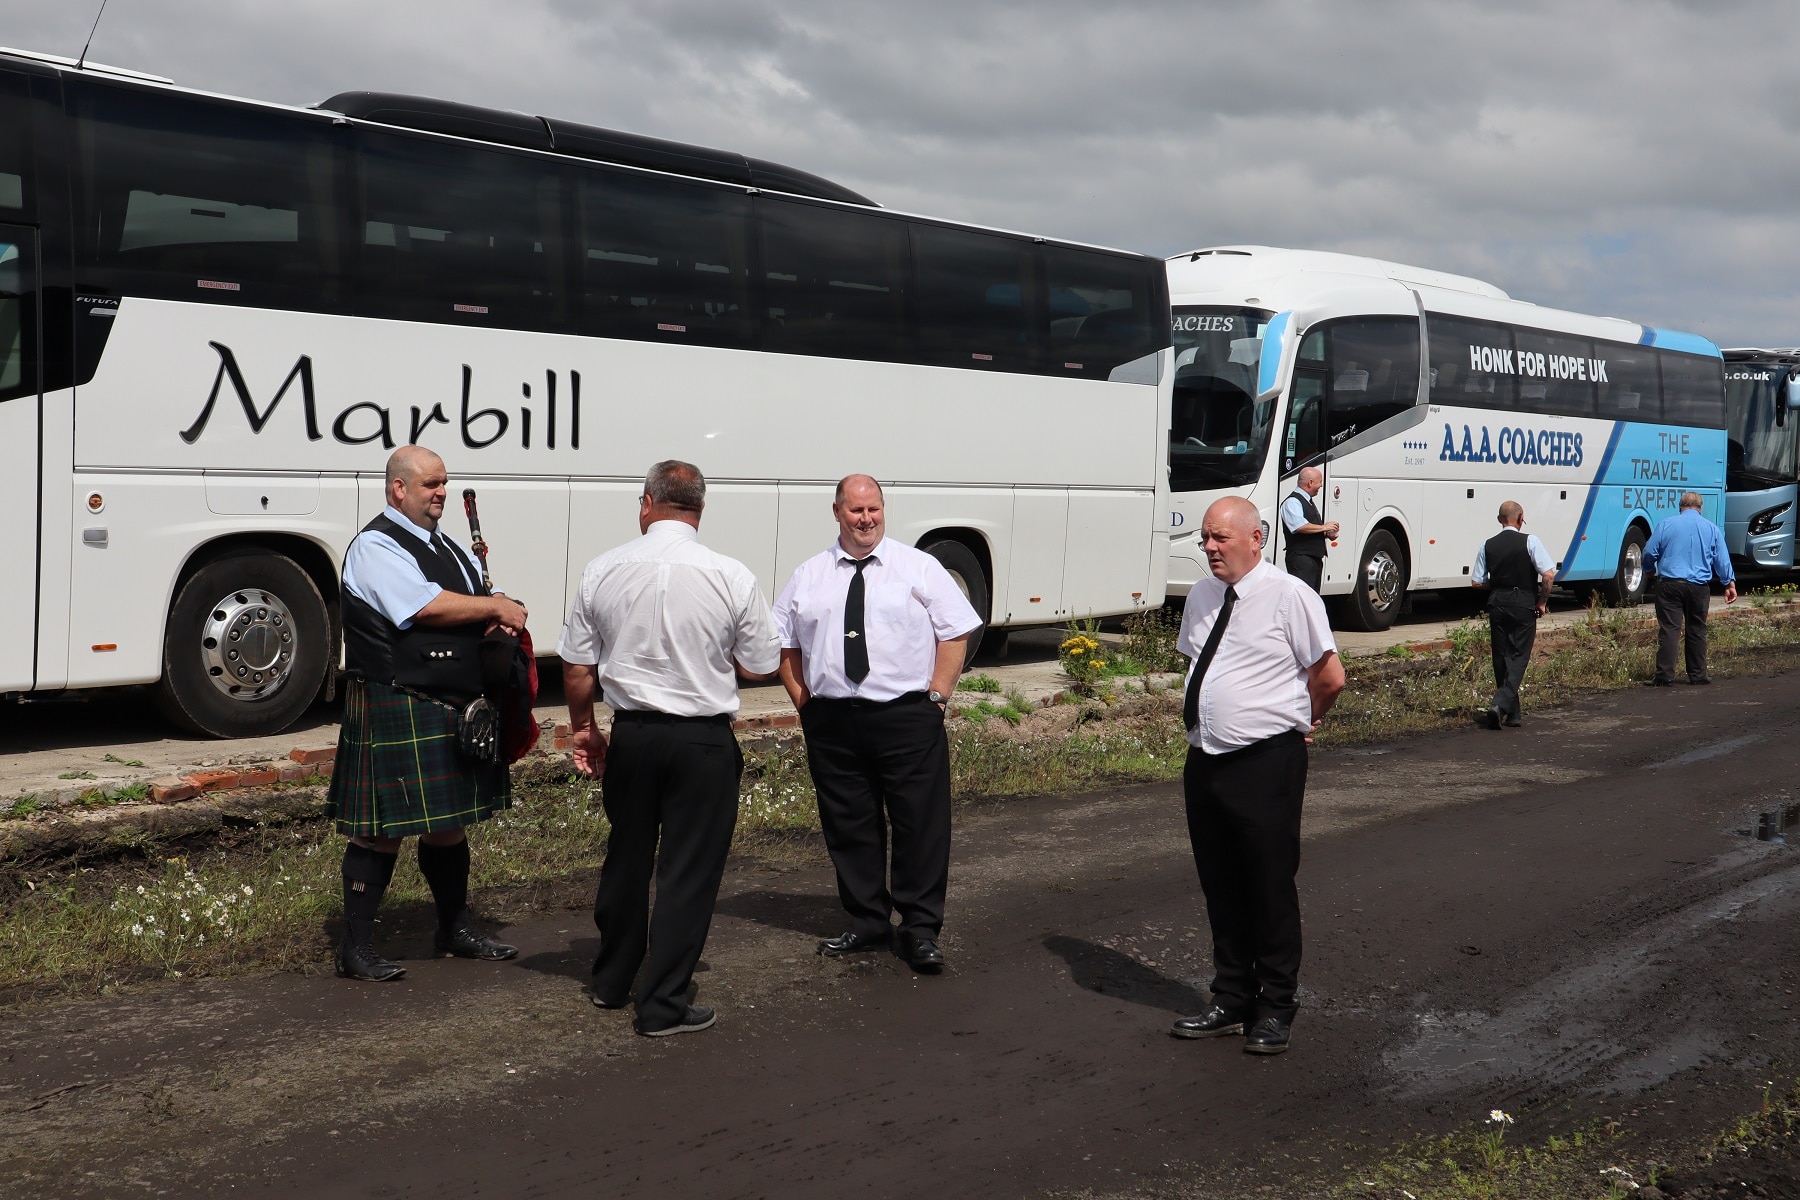 Scottish coach industry eligible for further funding support